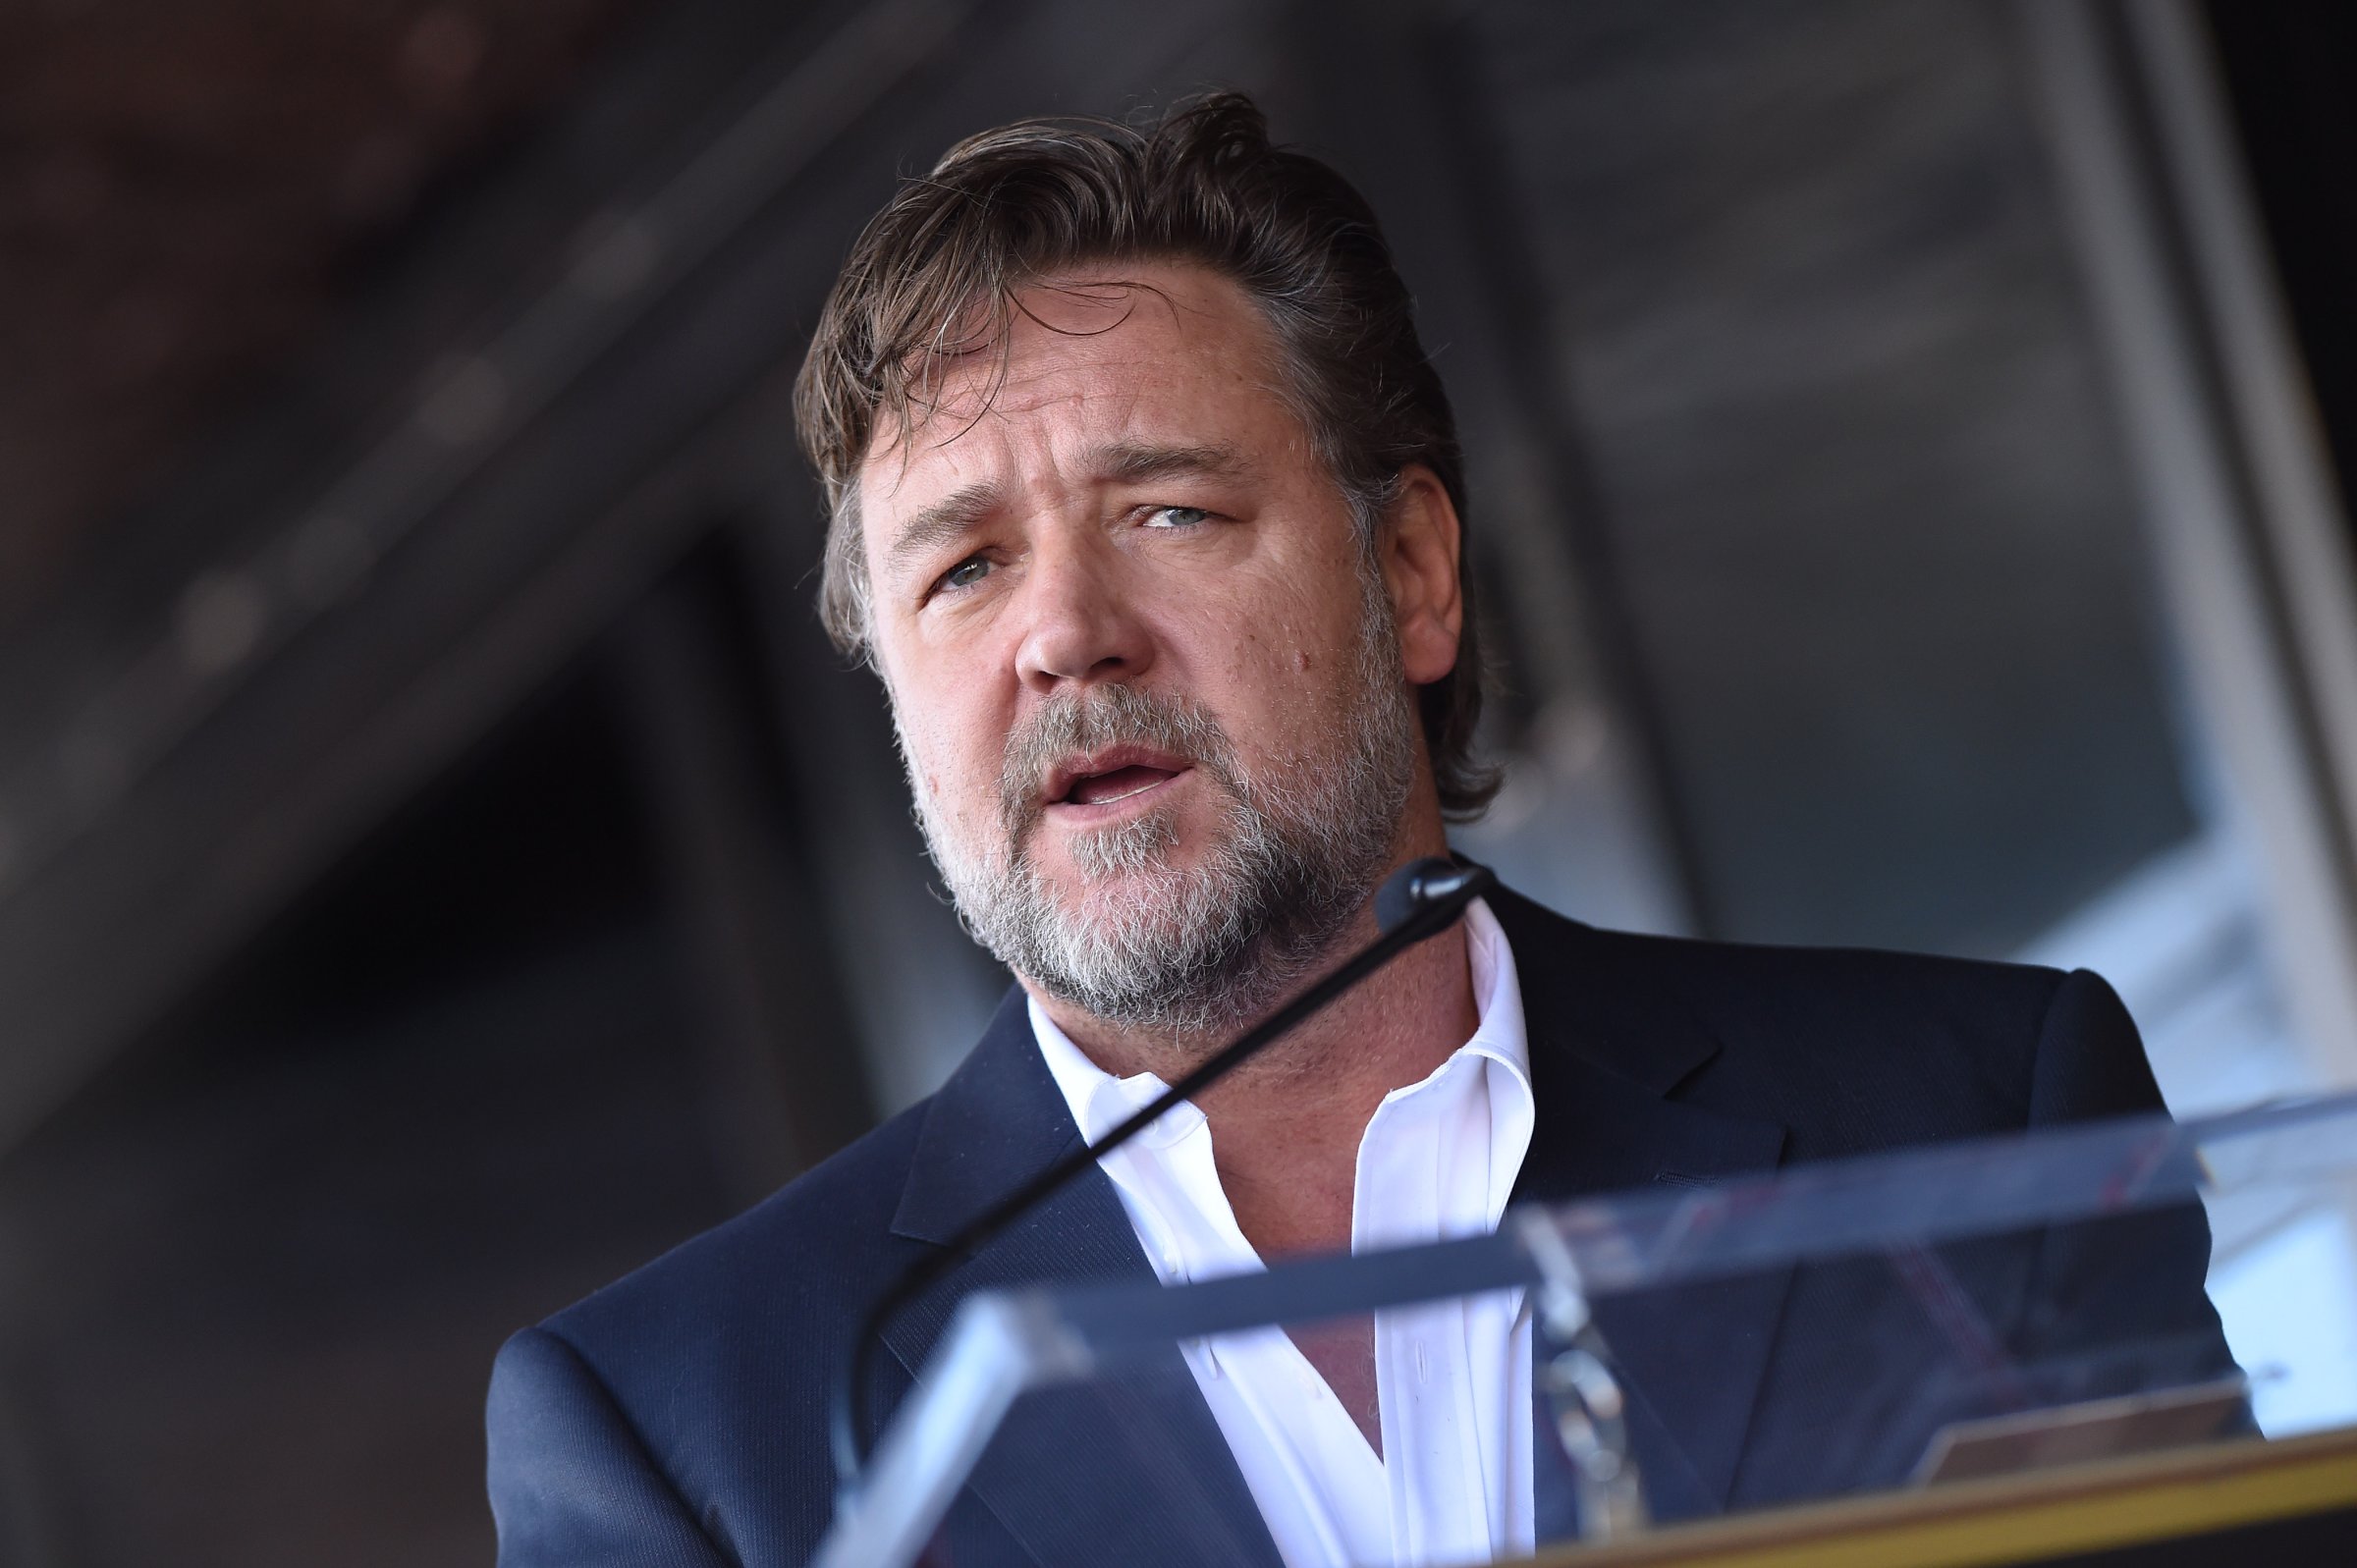 Actor Russell Crowe attends the ceremony honoring director Ridley Scott on Nov. 5, 2015 in Hollywood, California.